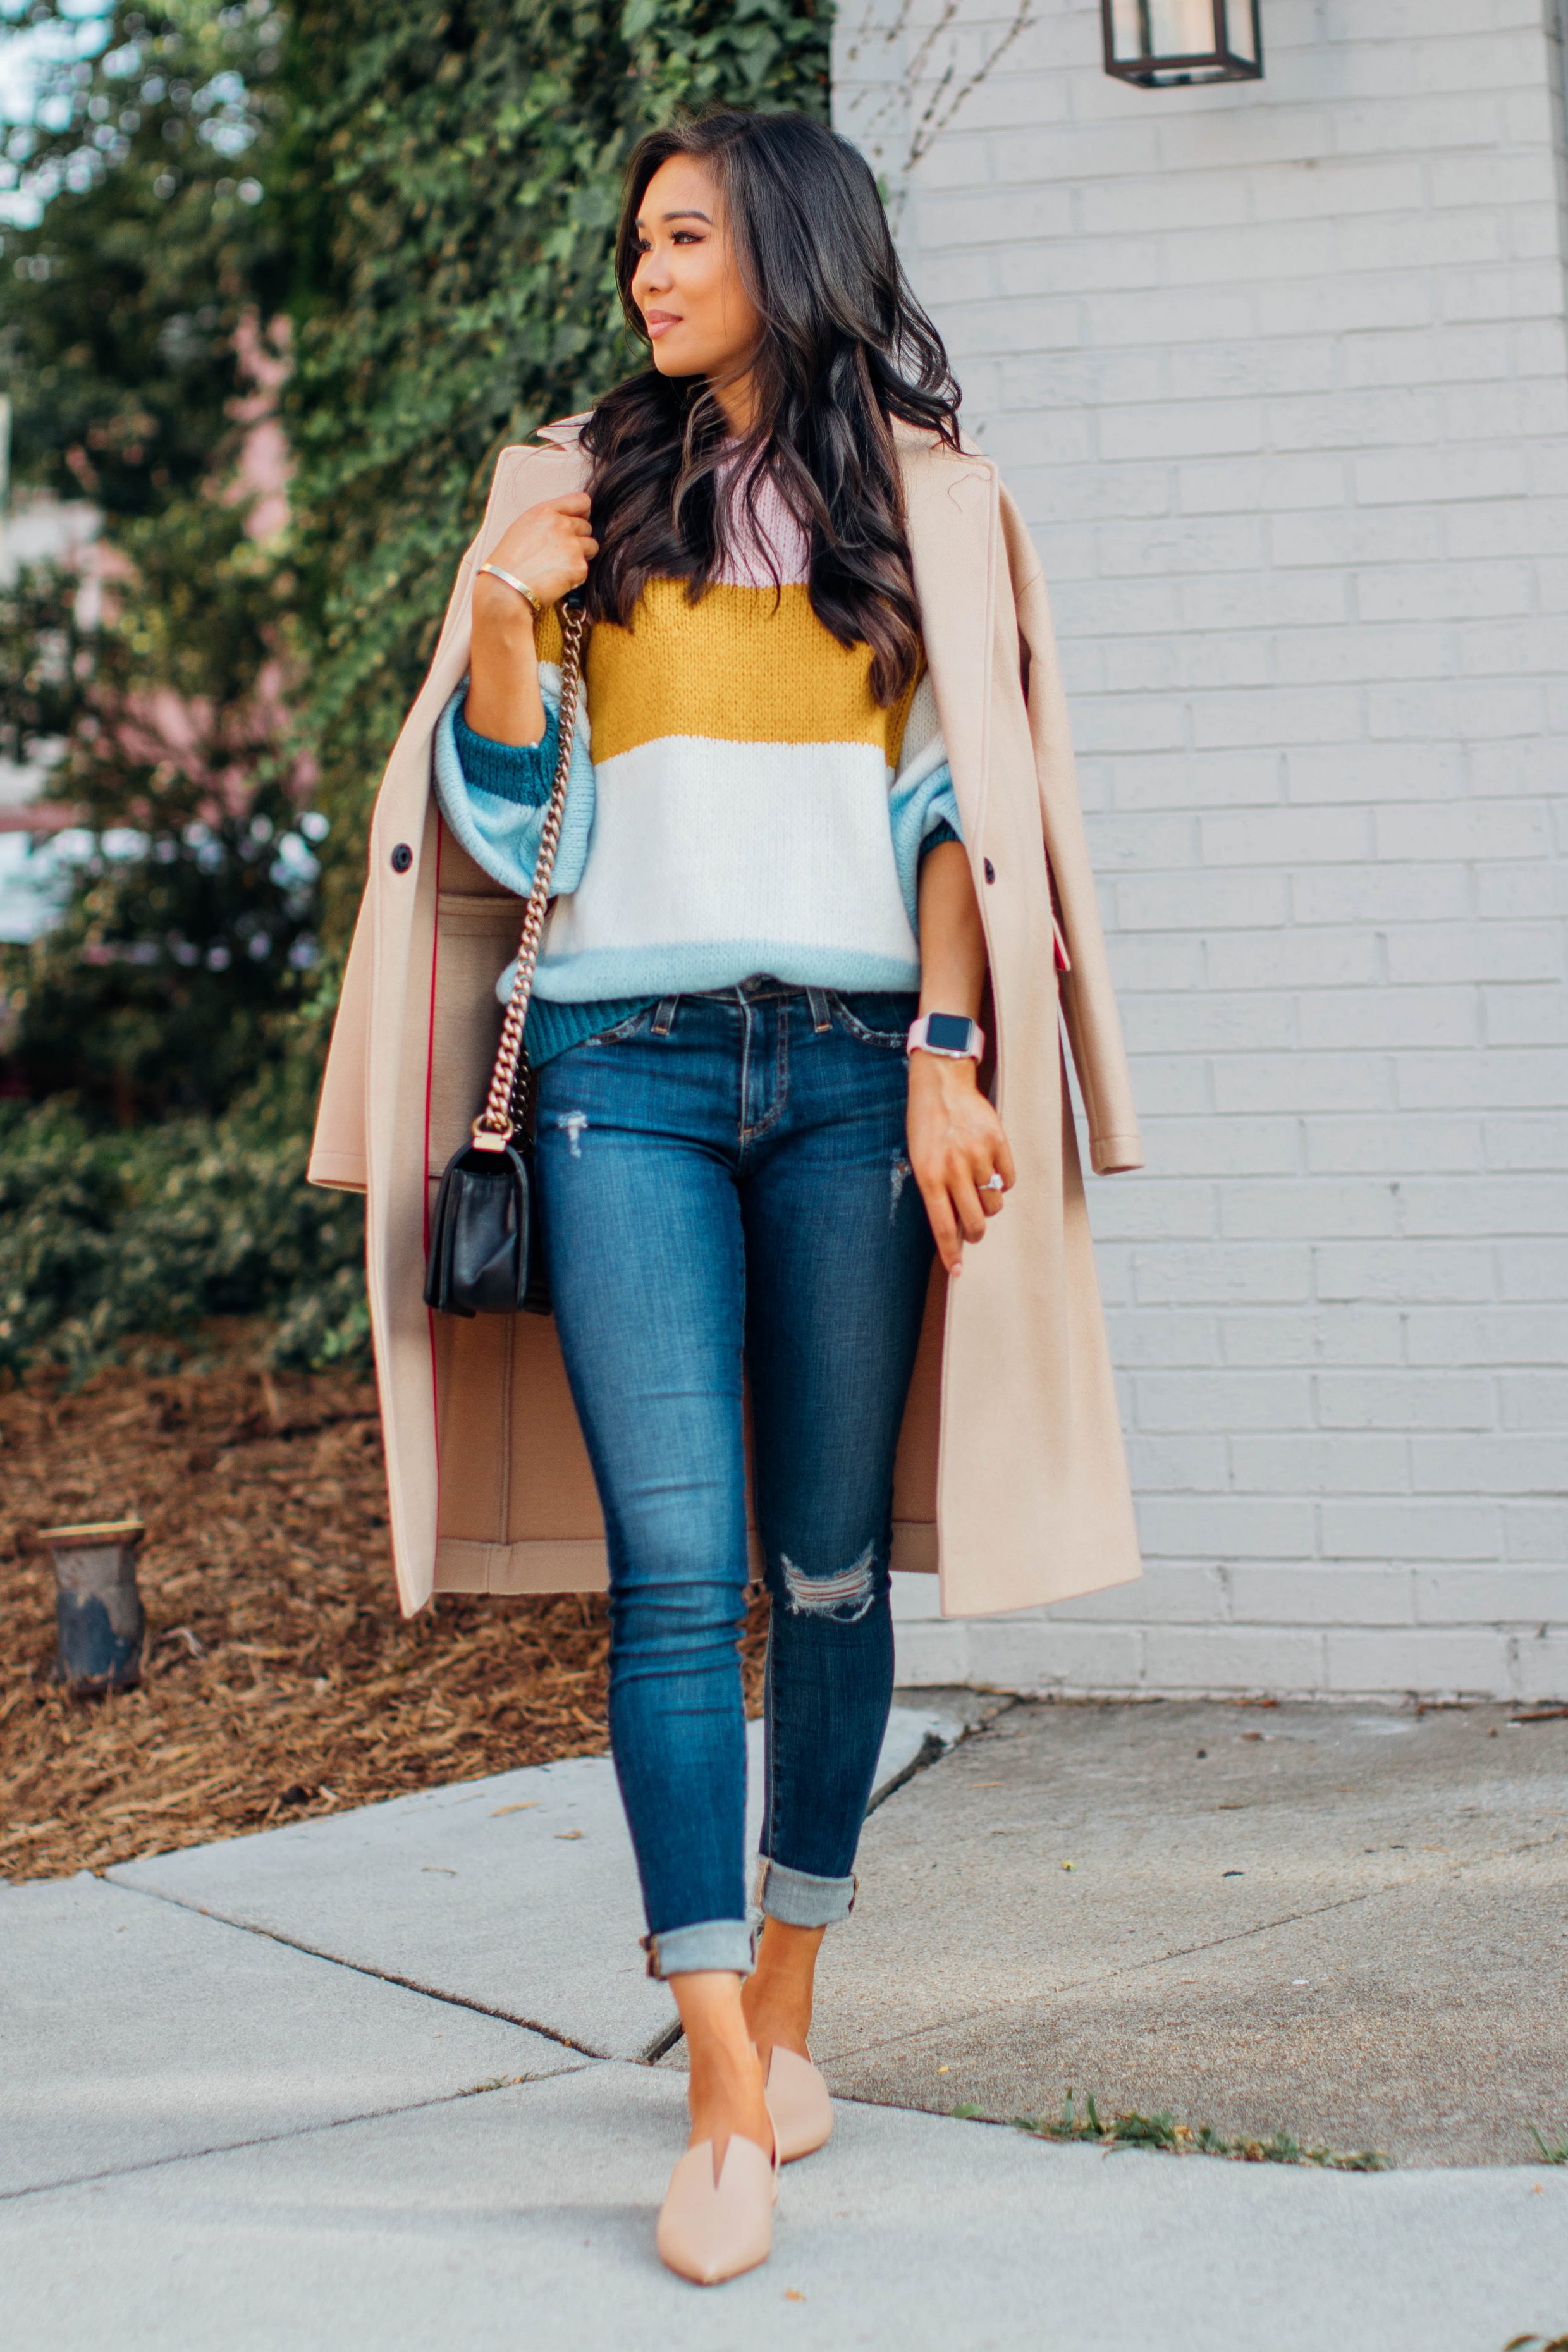 Blogger Hoang-Kim wears a Topshop striped transition sweater for fall